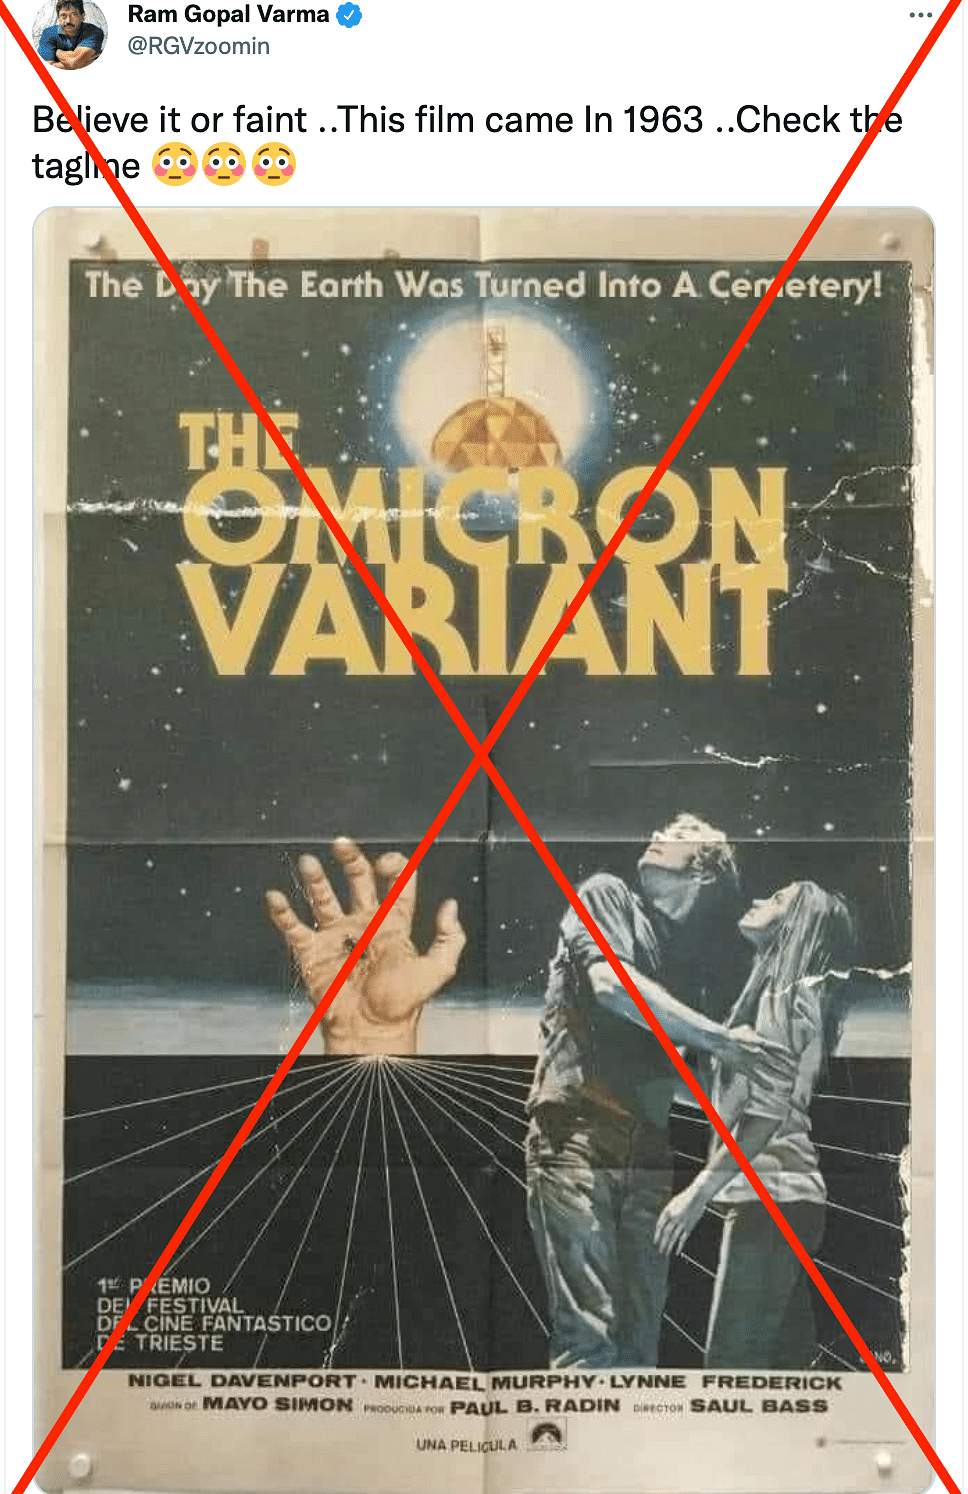 A digitally created poster is doing the rounds to claim a movie titled 'The Omicron Variant' was released in 1963.